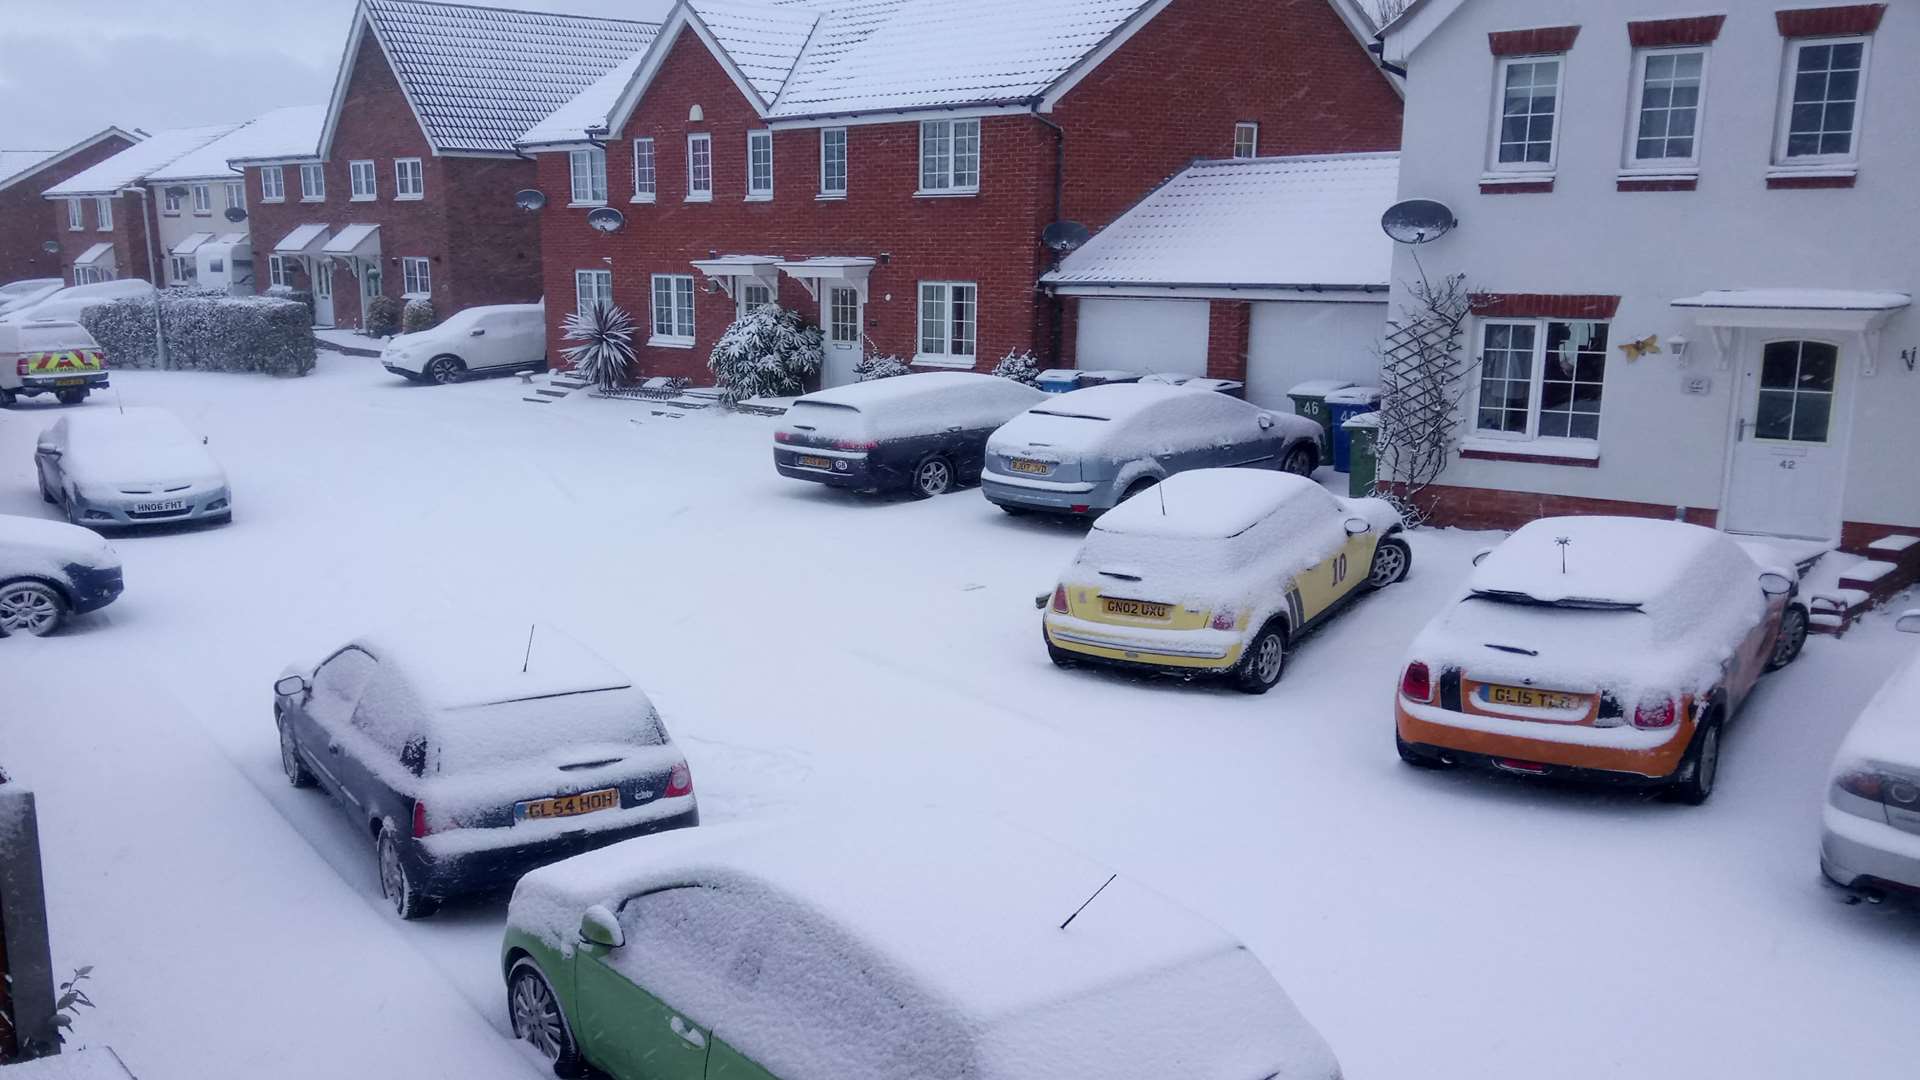 This picture from Sam Payne shows the snowy scenes from the Isle of Sheppey